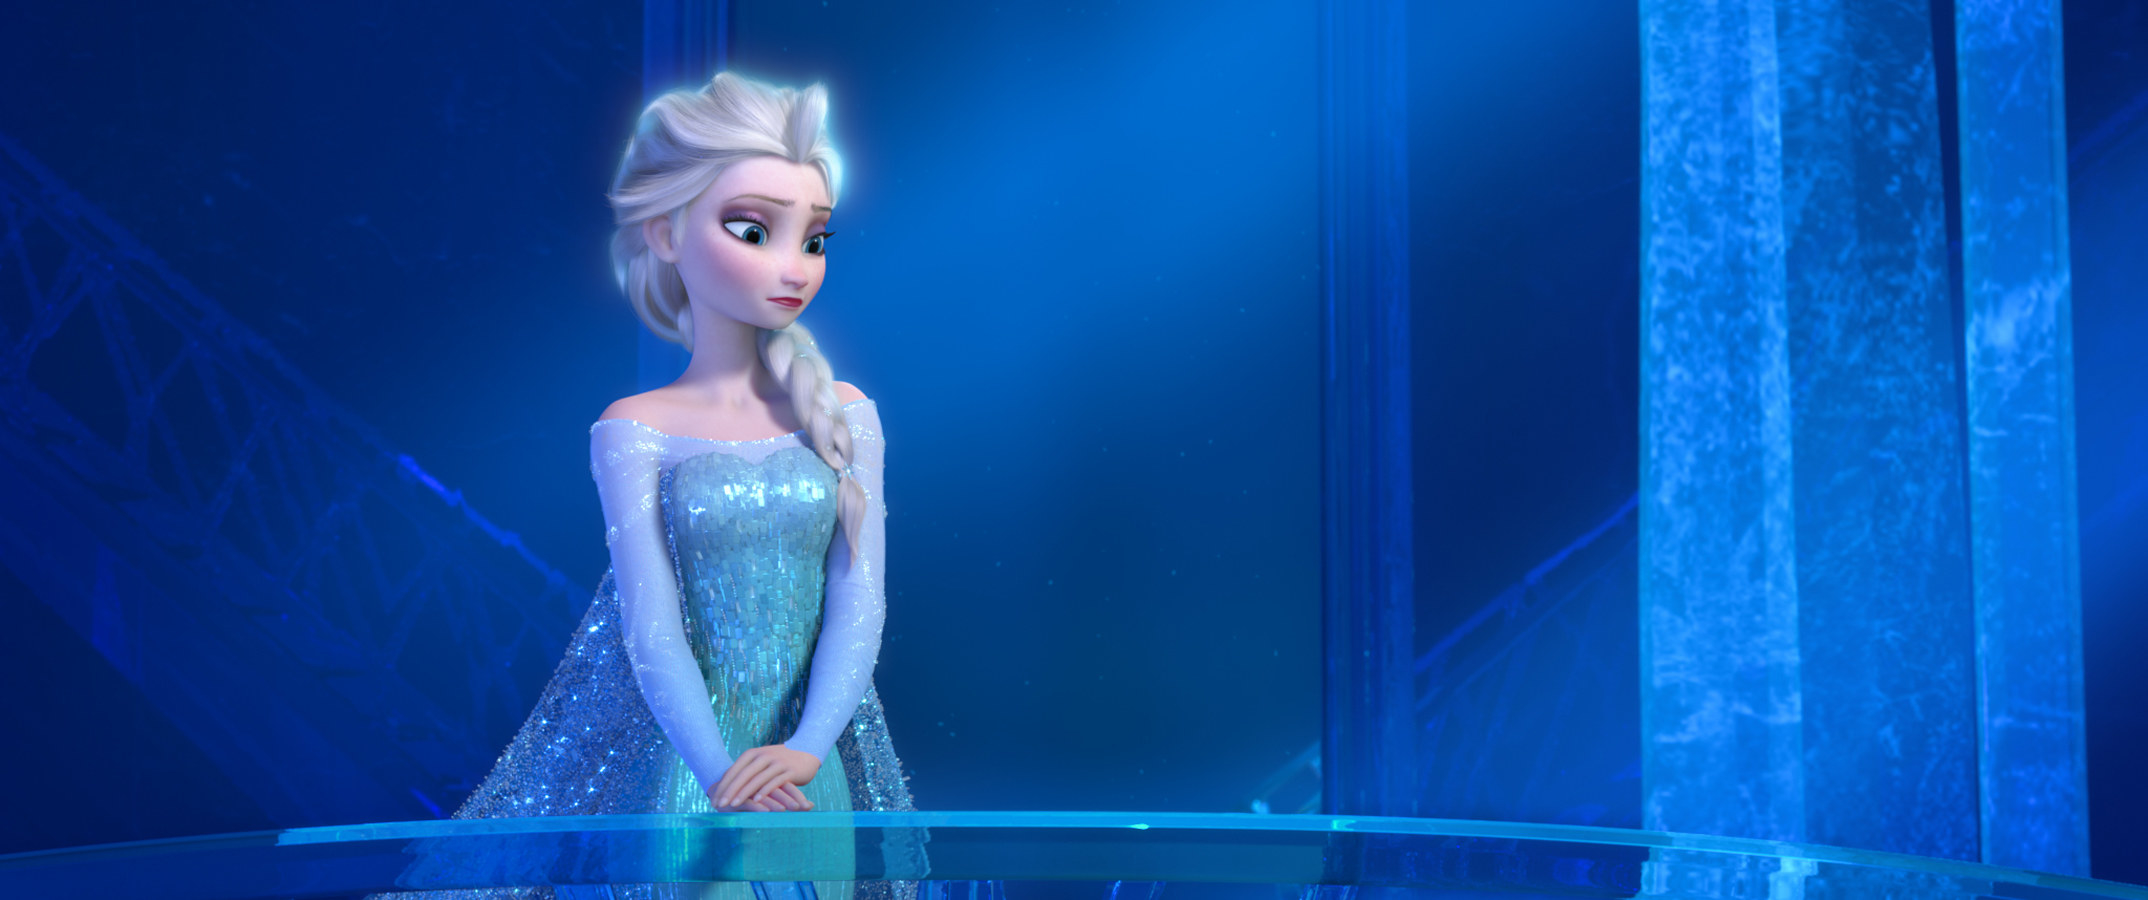 Elsa stands in an ice palace